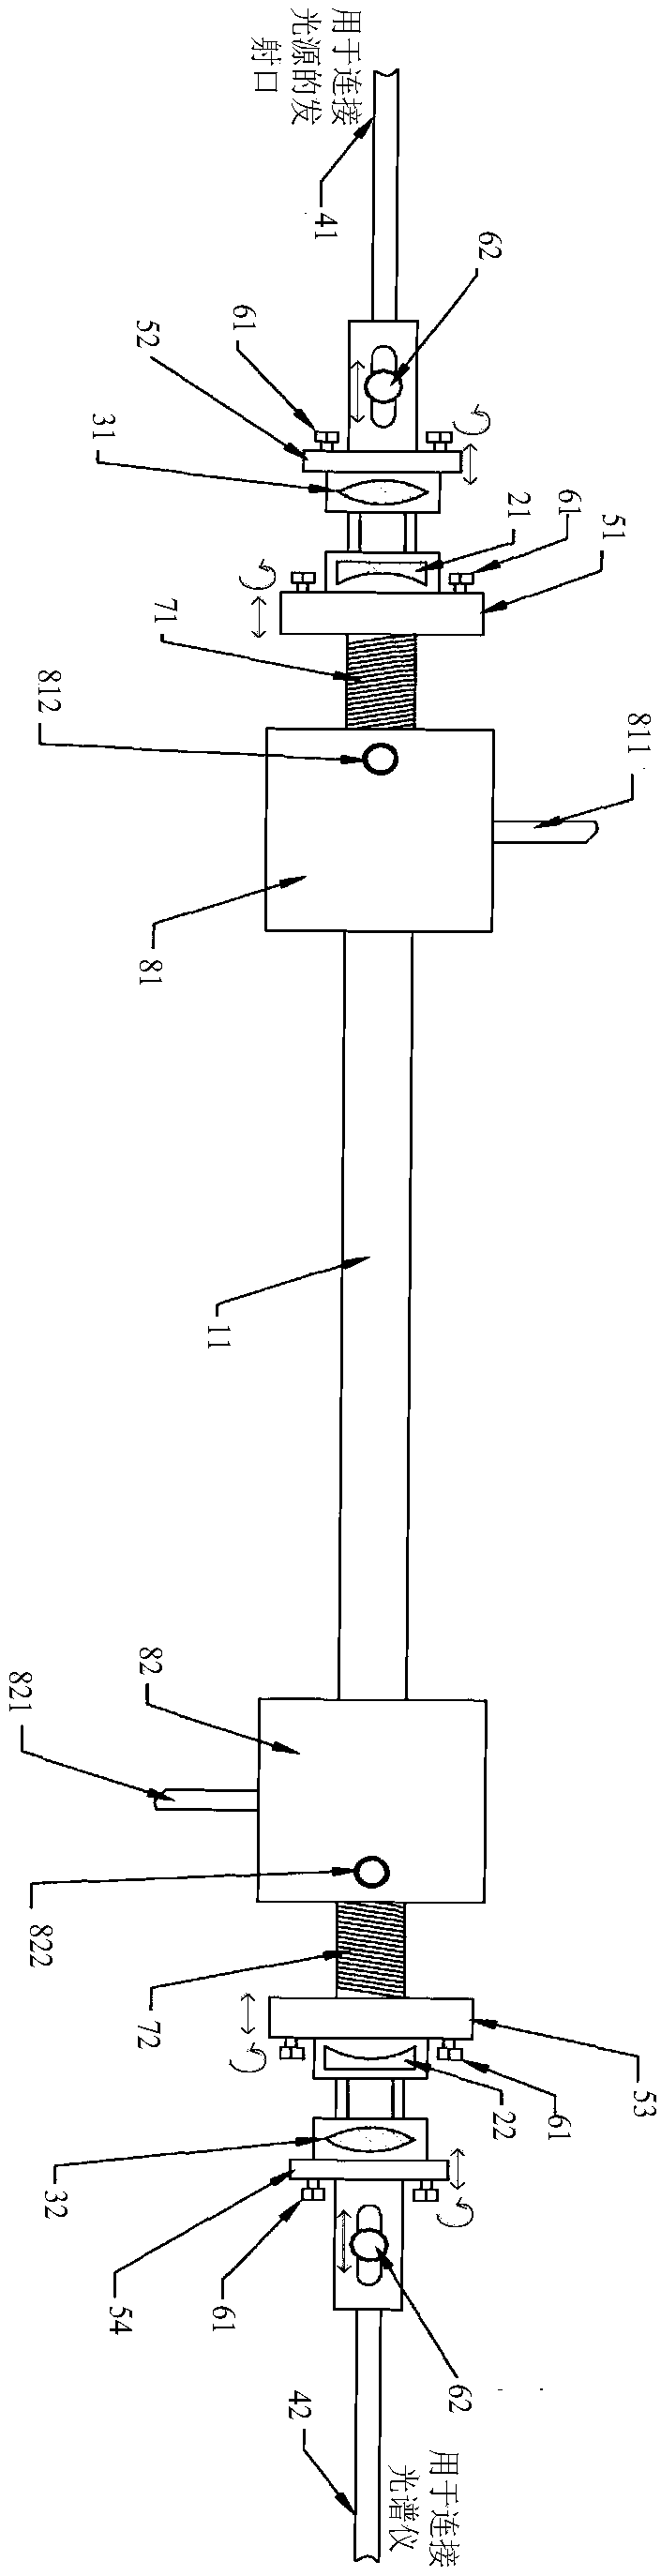 High reflector screening method applied to optical cavity structure